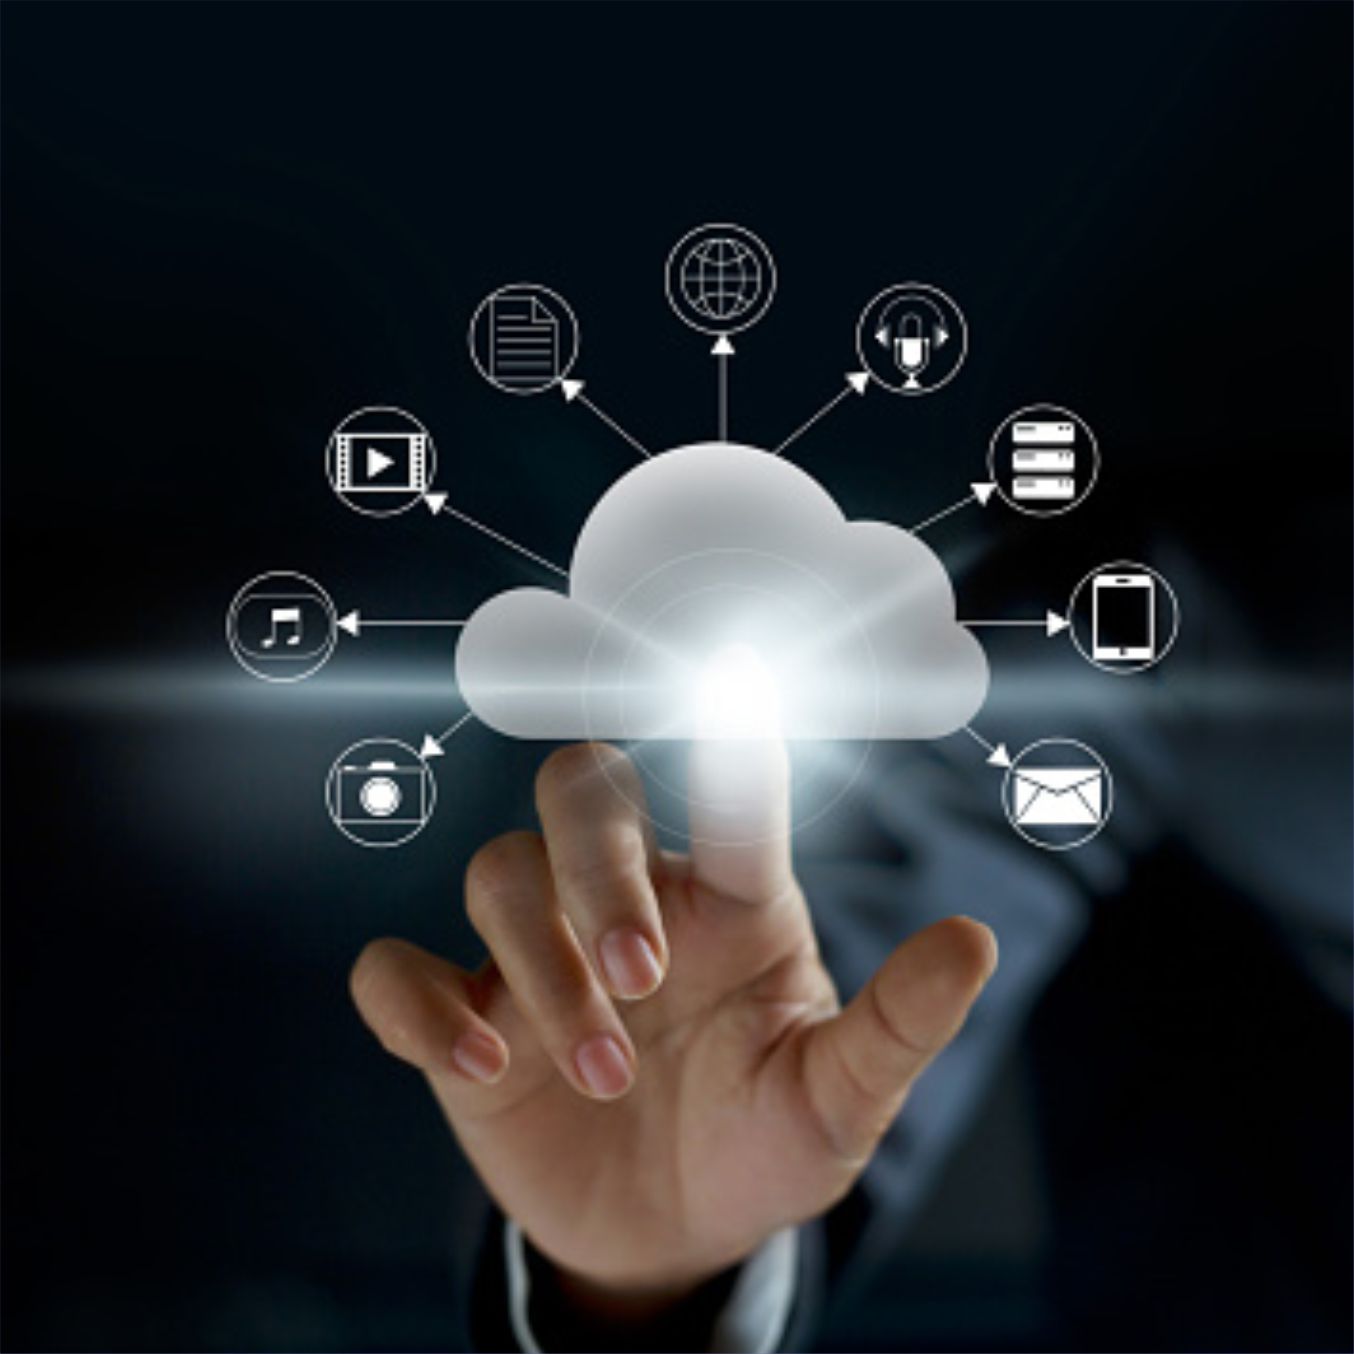 The Cloud Technology and Business